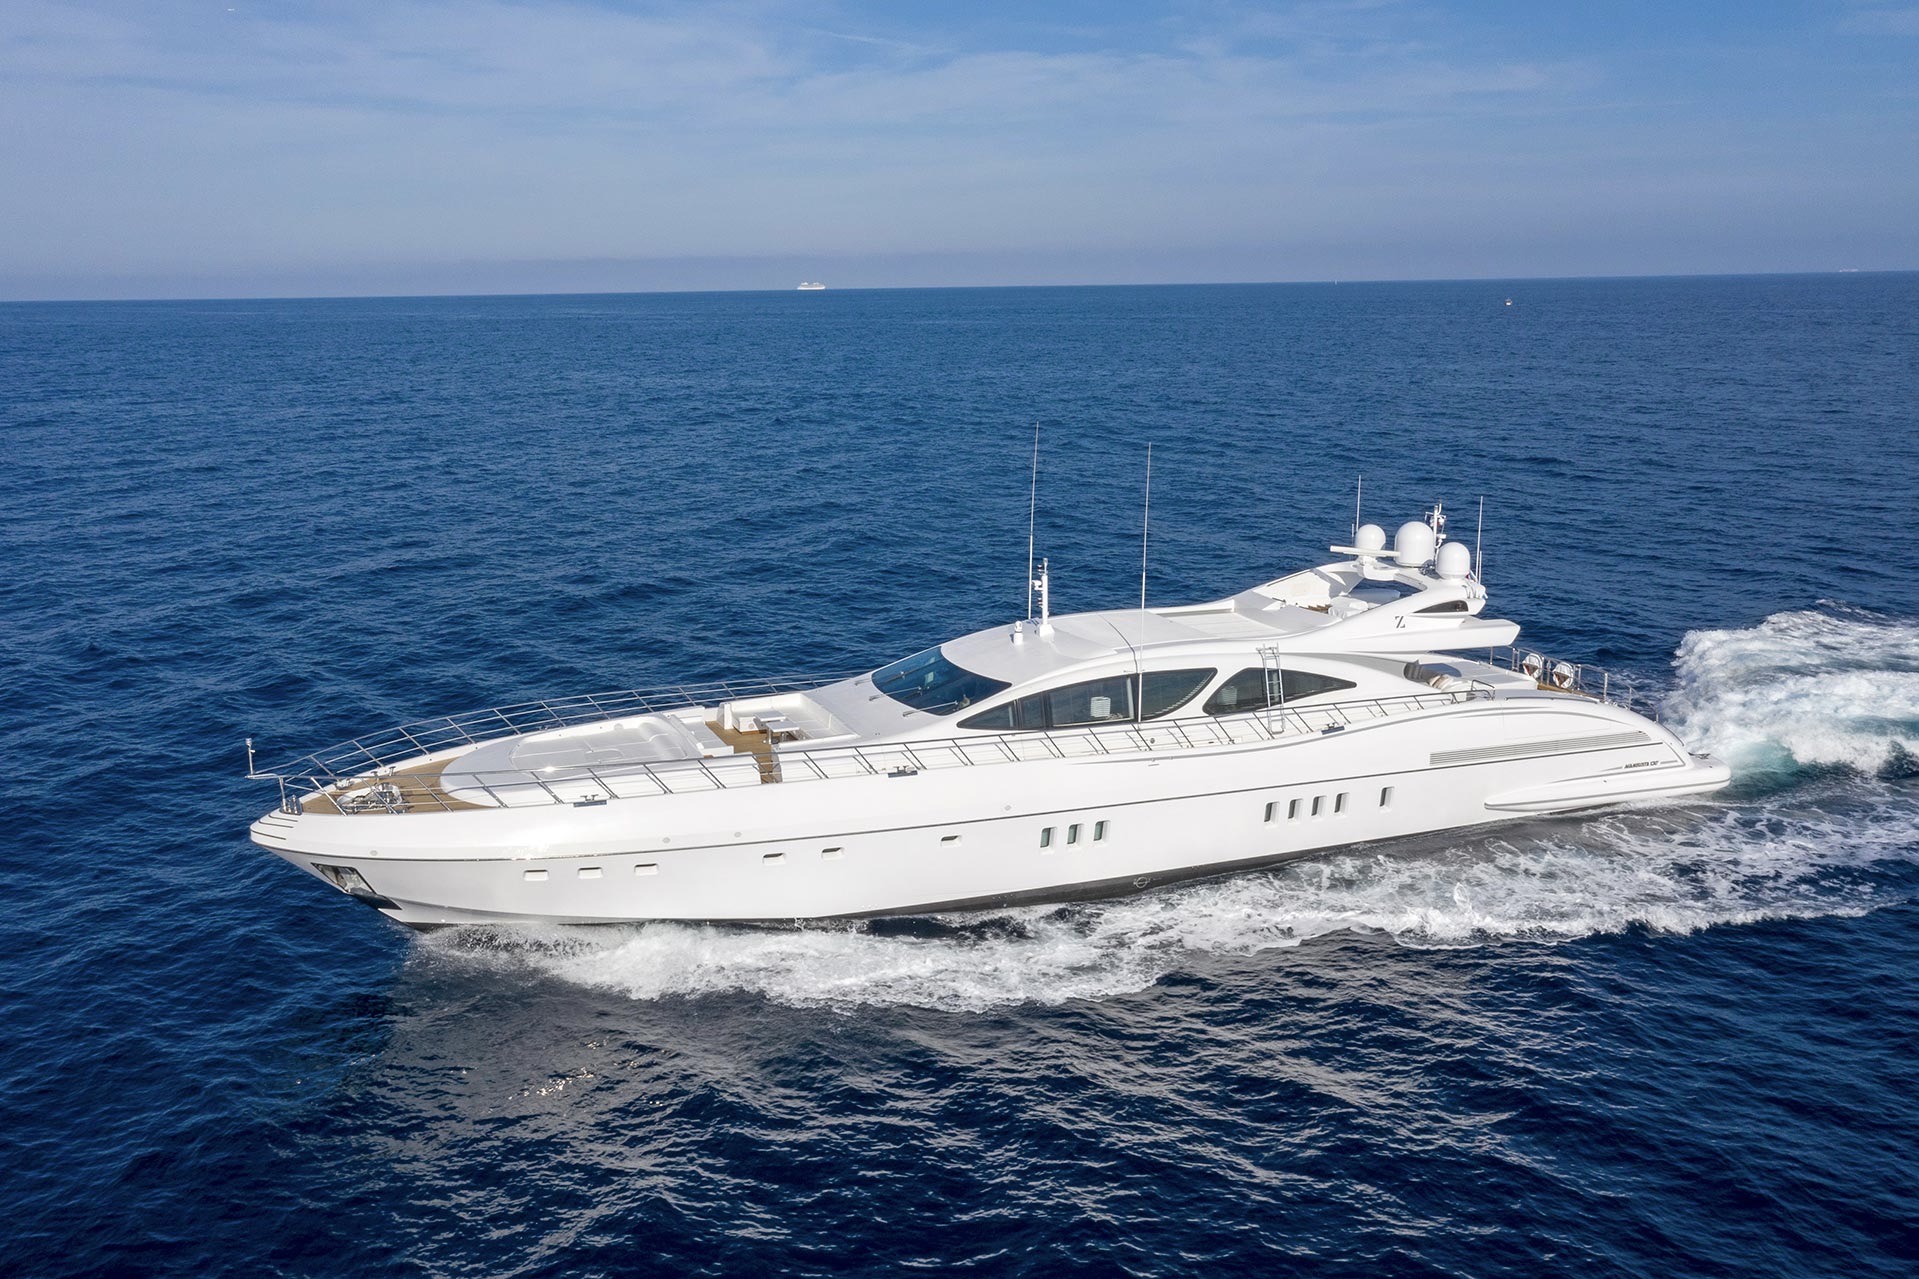 CRAZY Yacht for Charter - CRAZY Yacht Price - TWW Yachts